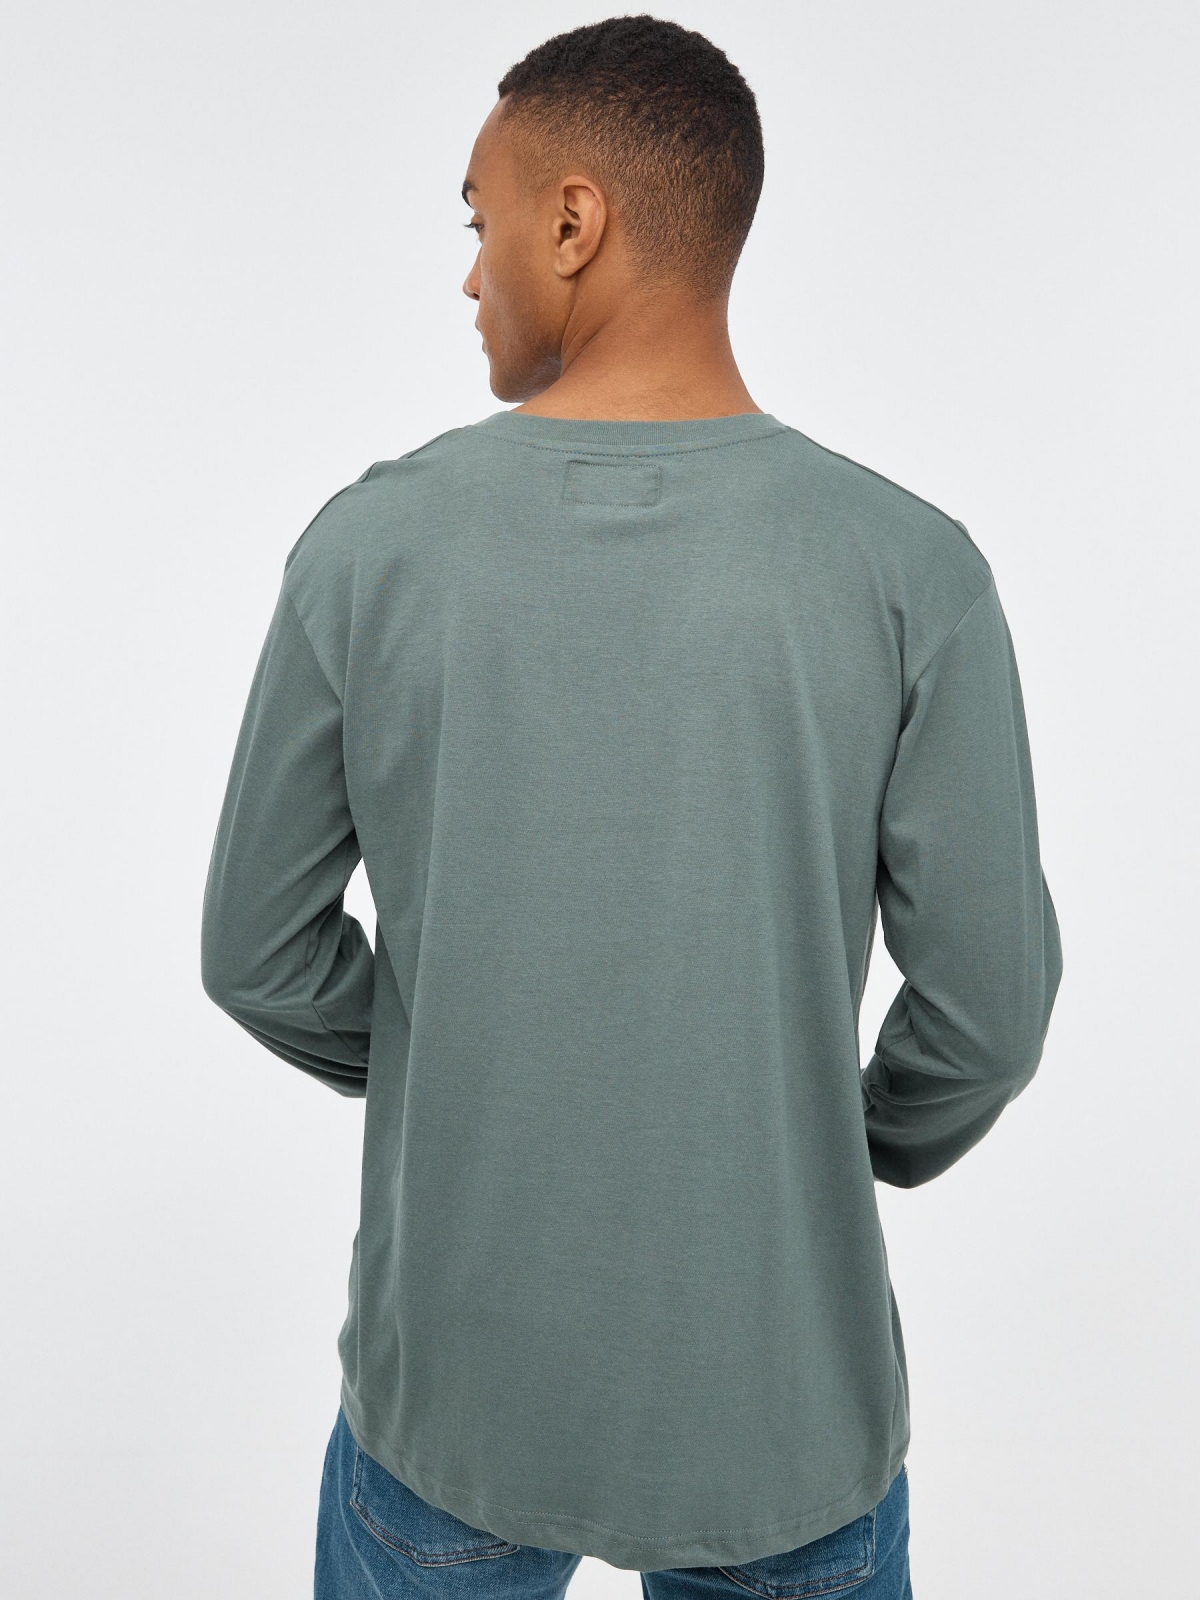 Power print sleeve t-shirt greyish green middle back view